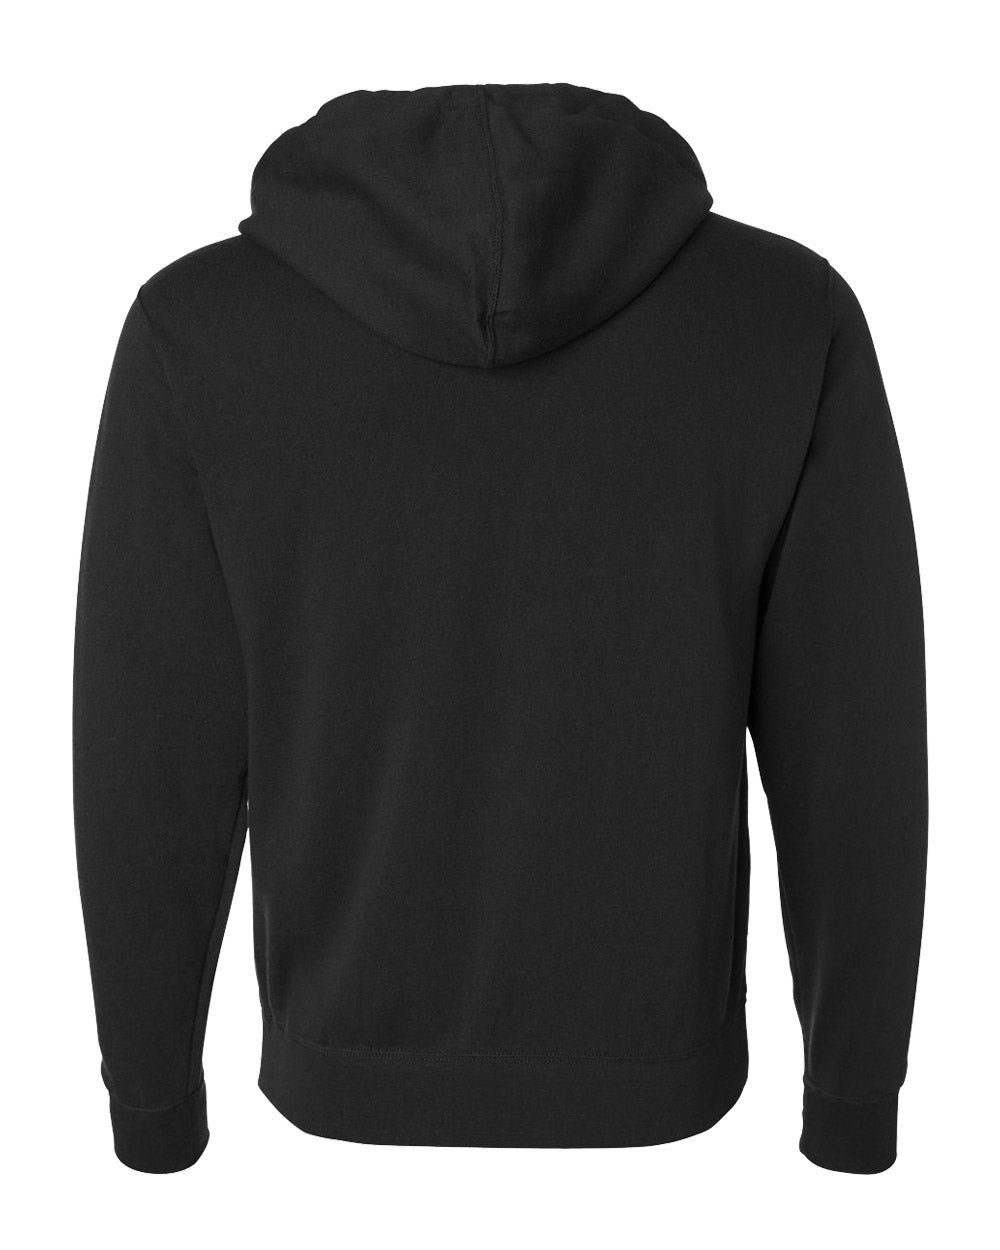 Ronin Predator Pullover Hoodie - Black - Conquering Barbell